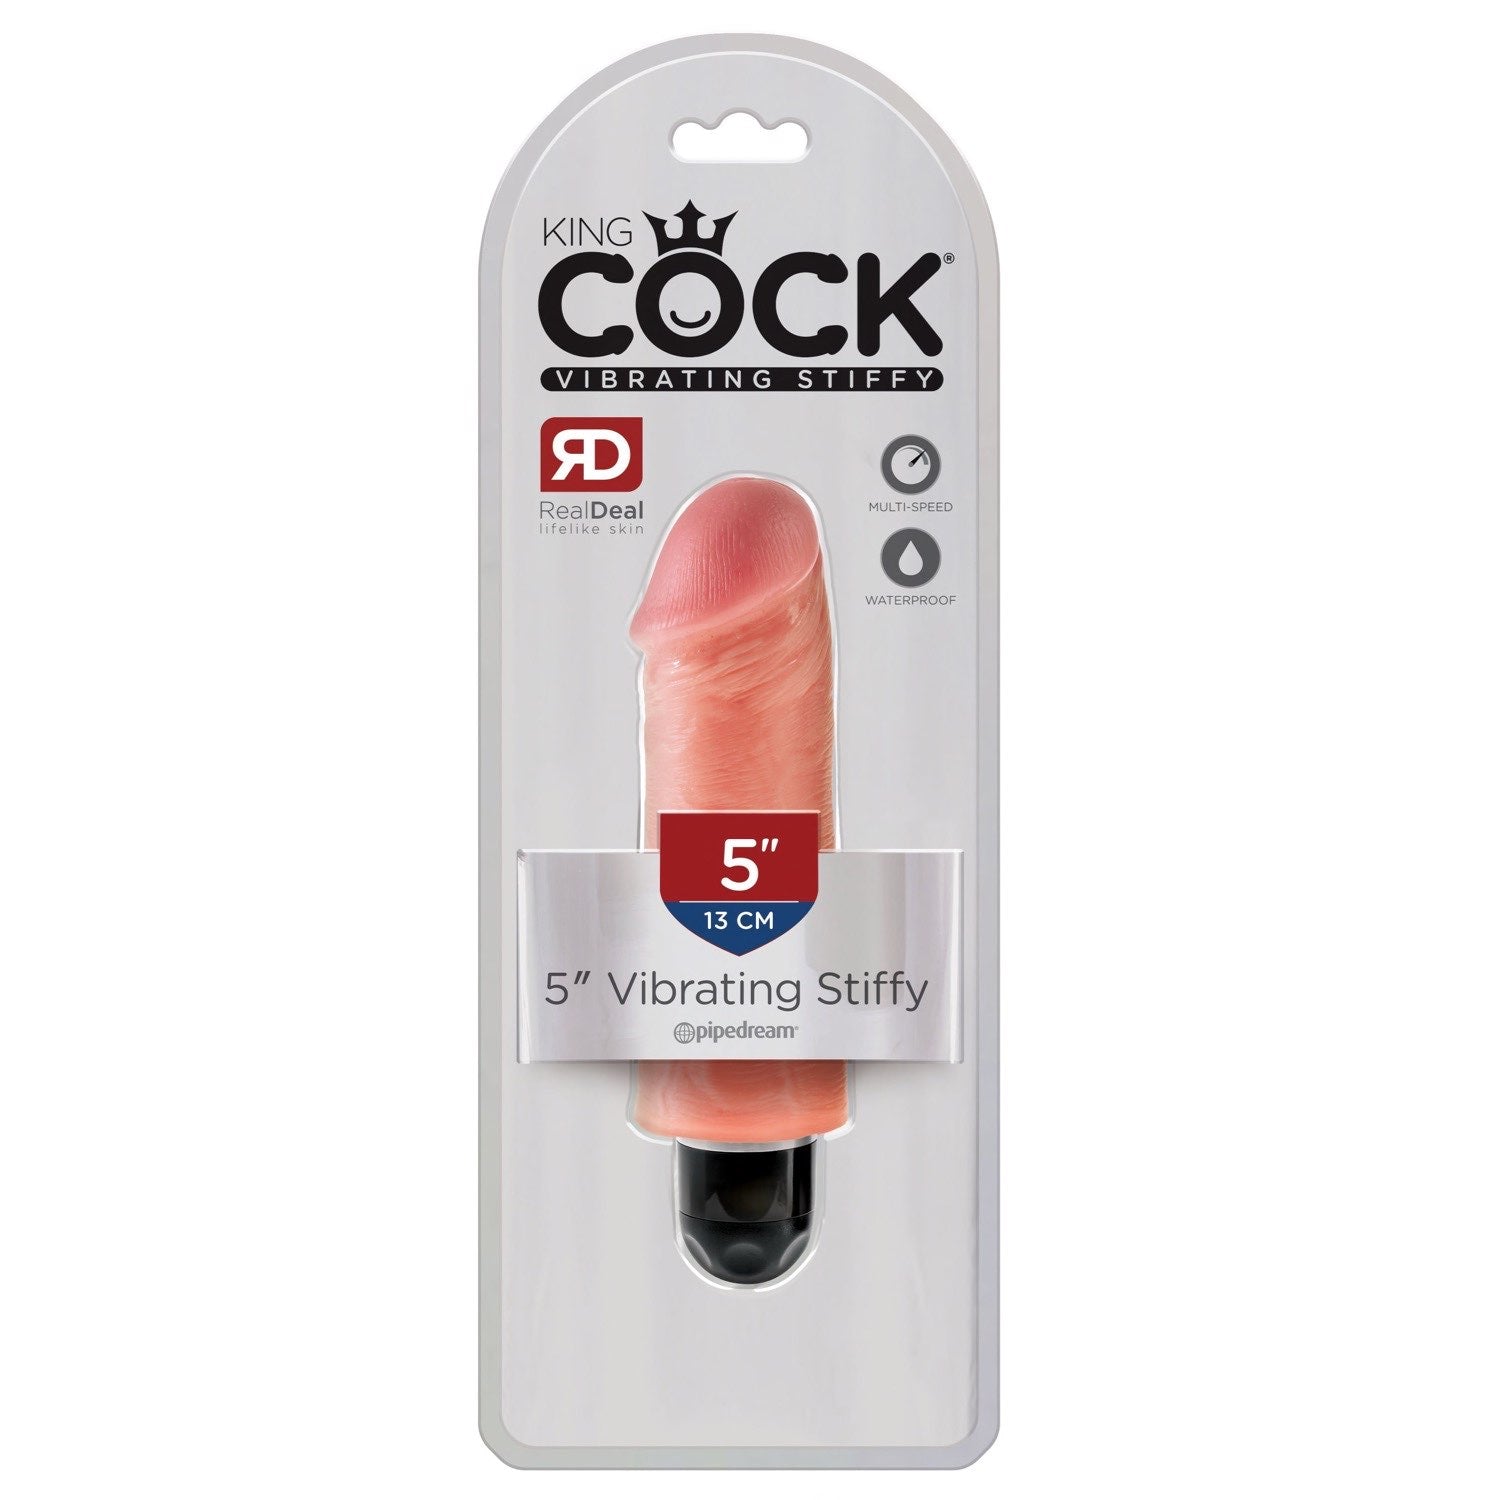 King Cock 5&quot; Vibrating Stiffy - Flesh 12.5 cm Vibrating Dong by Pipedream